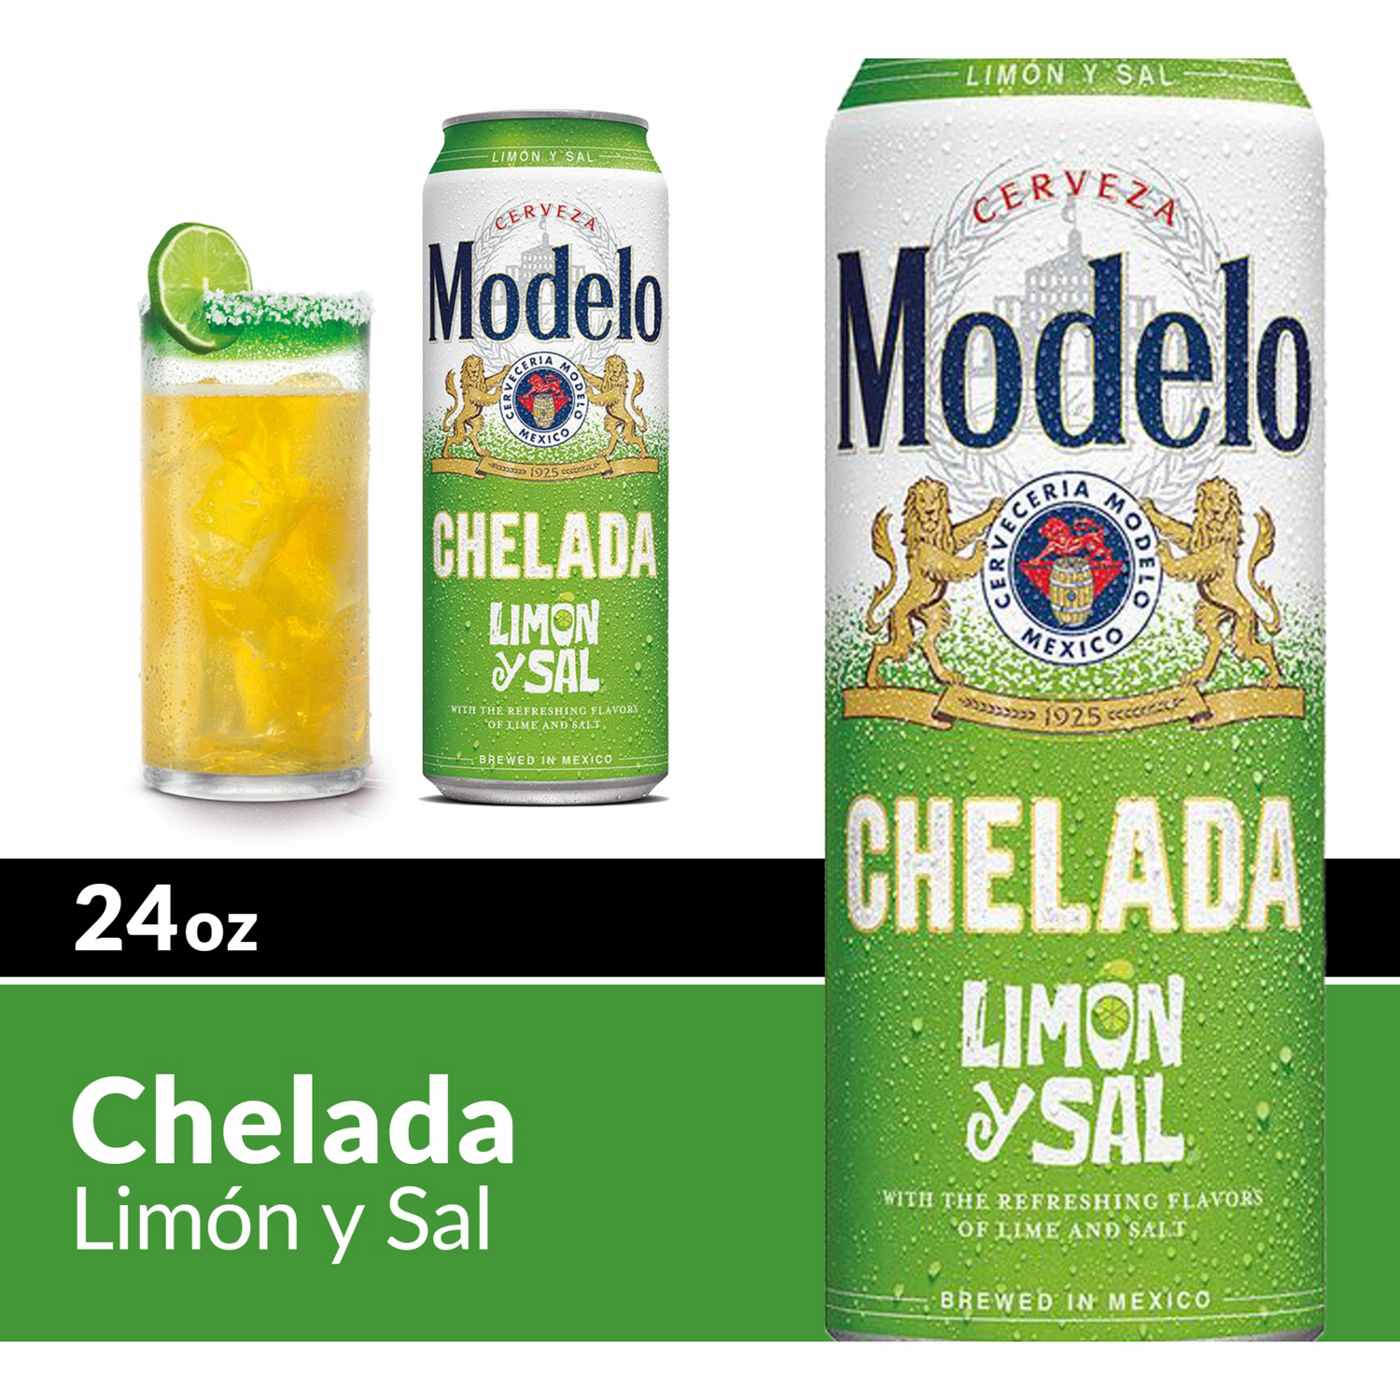 Modelo Chelada Limon y Sal Mexican Import Flavored Beer 24 oz Can; image 2 of 9